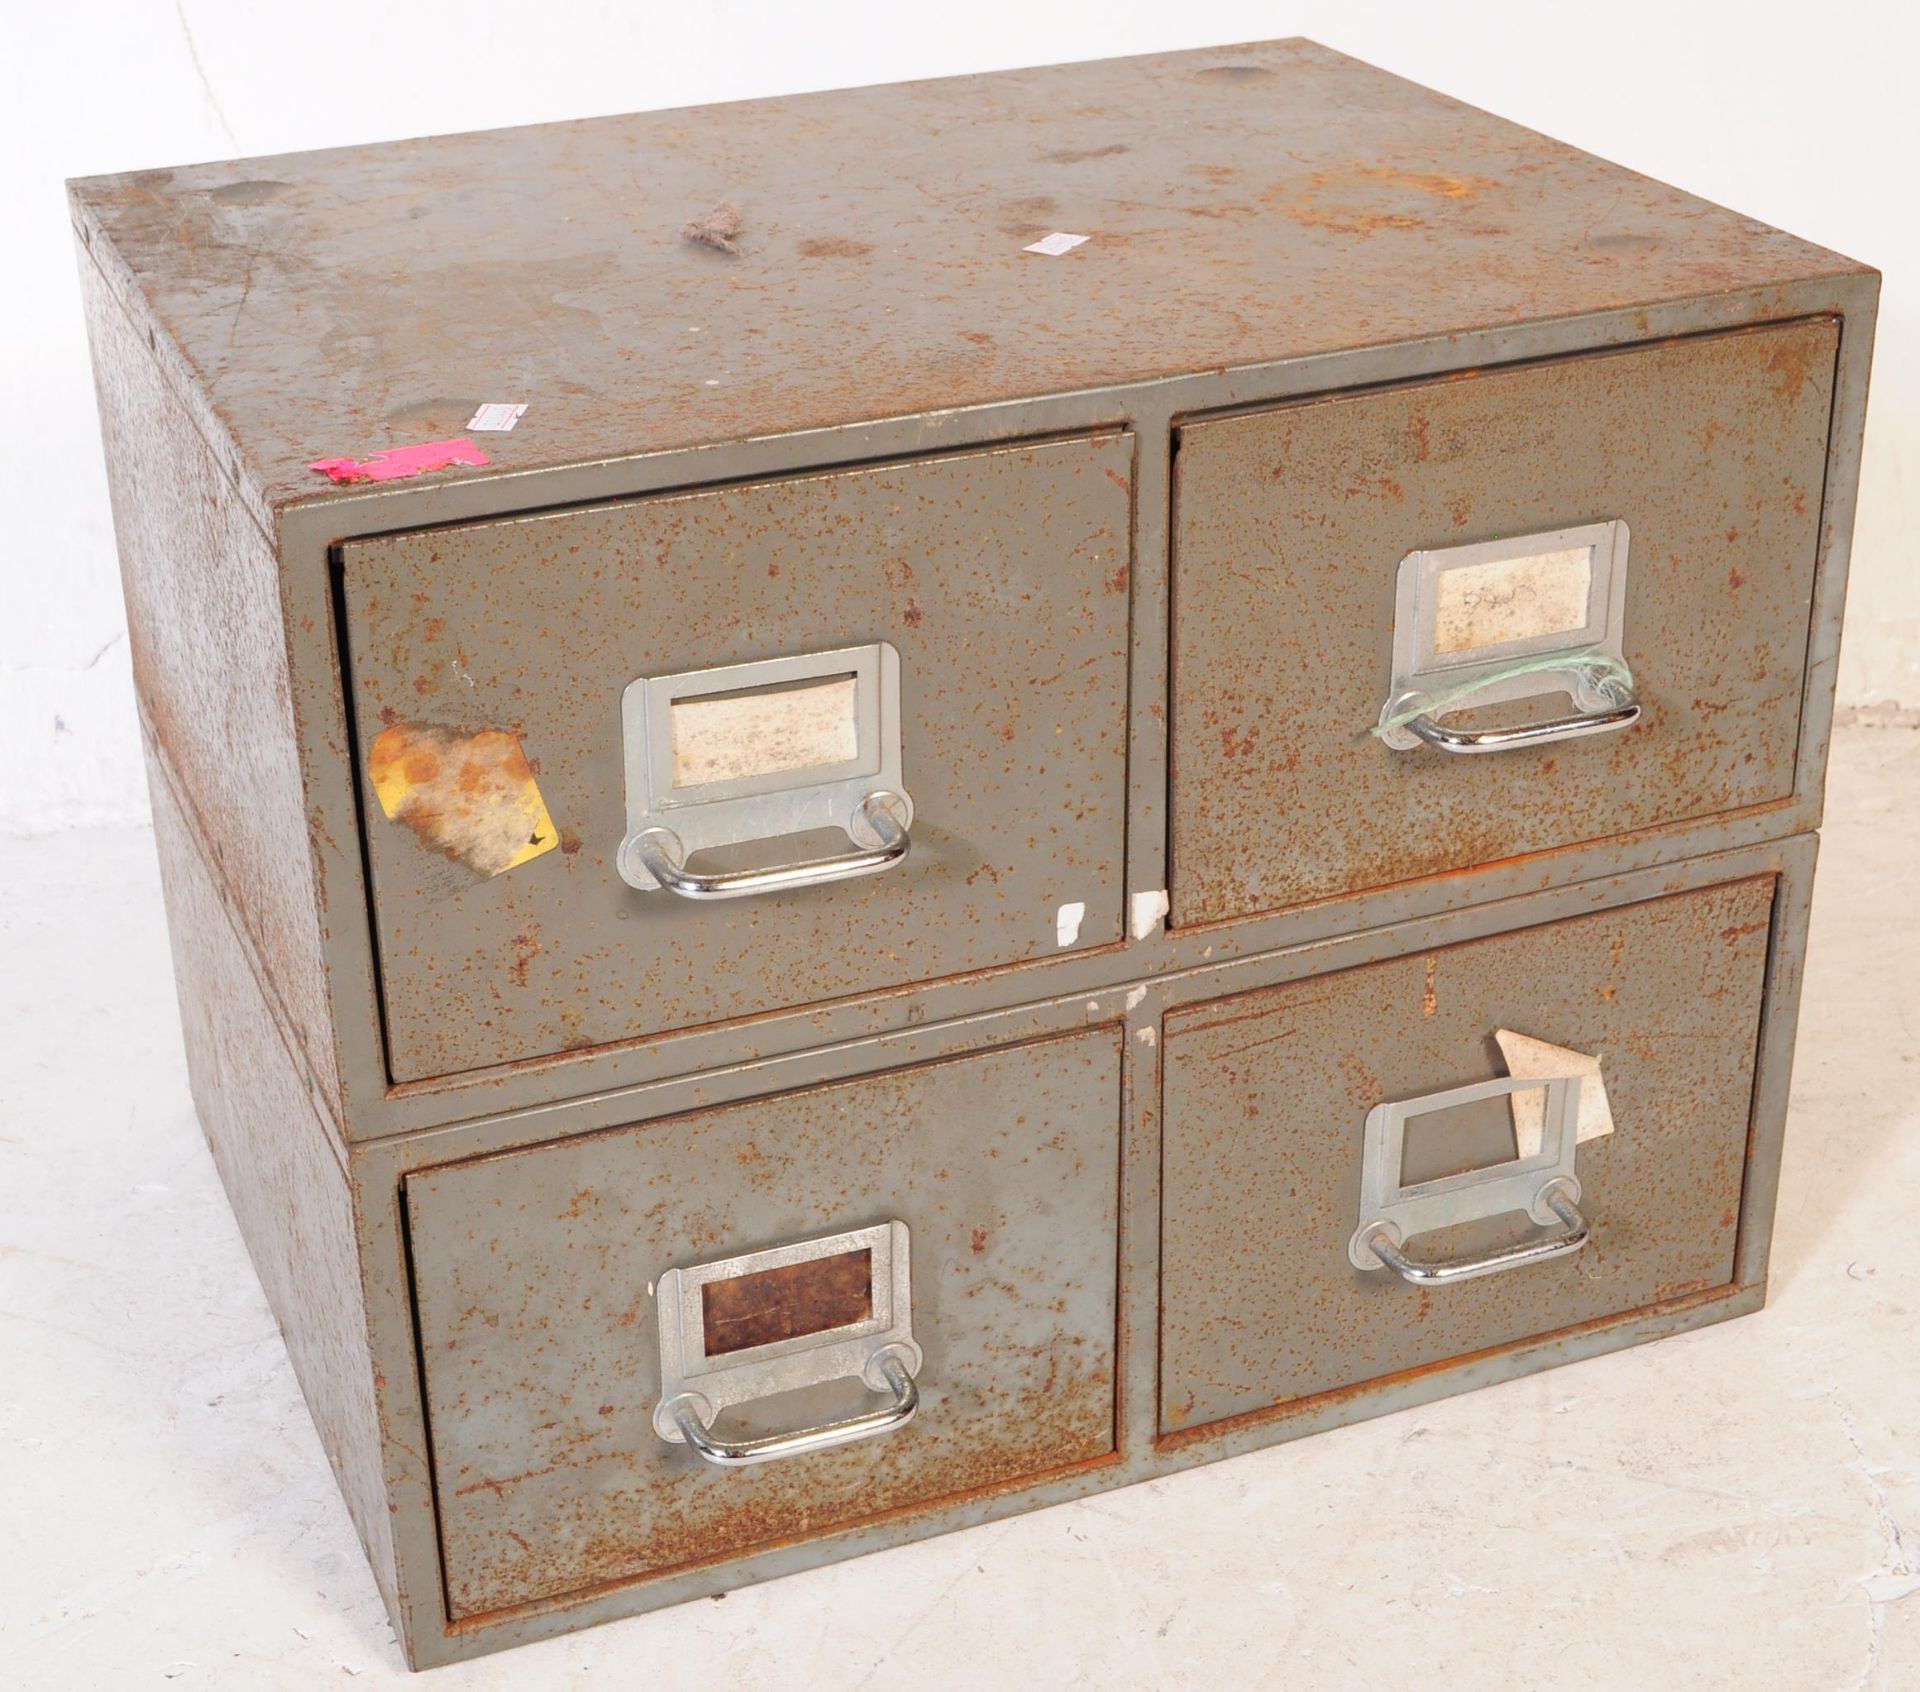 COLLECTION OF INDUSTRIAL 20TH CENTURY METAL FILING CABINETS - Image 2 of 4